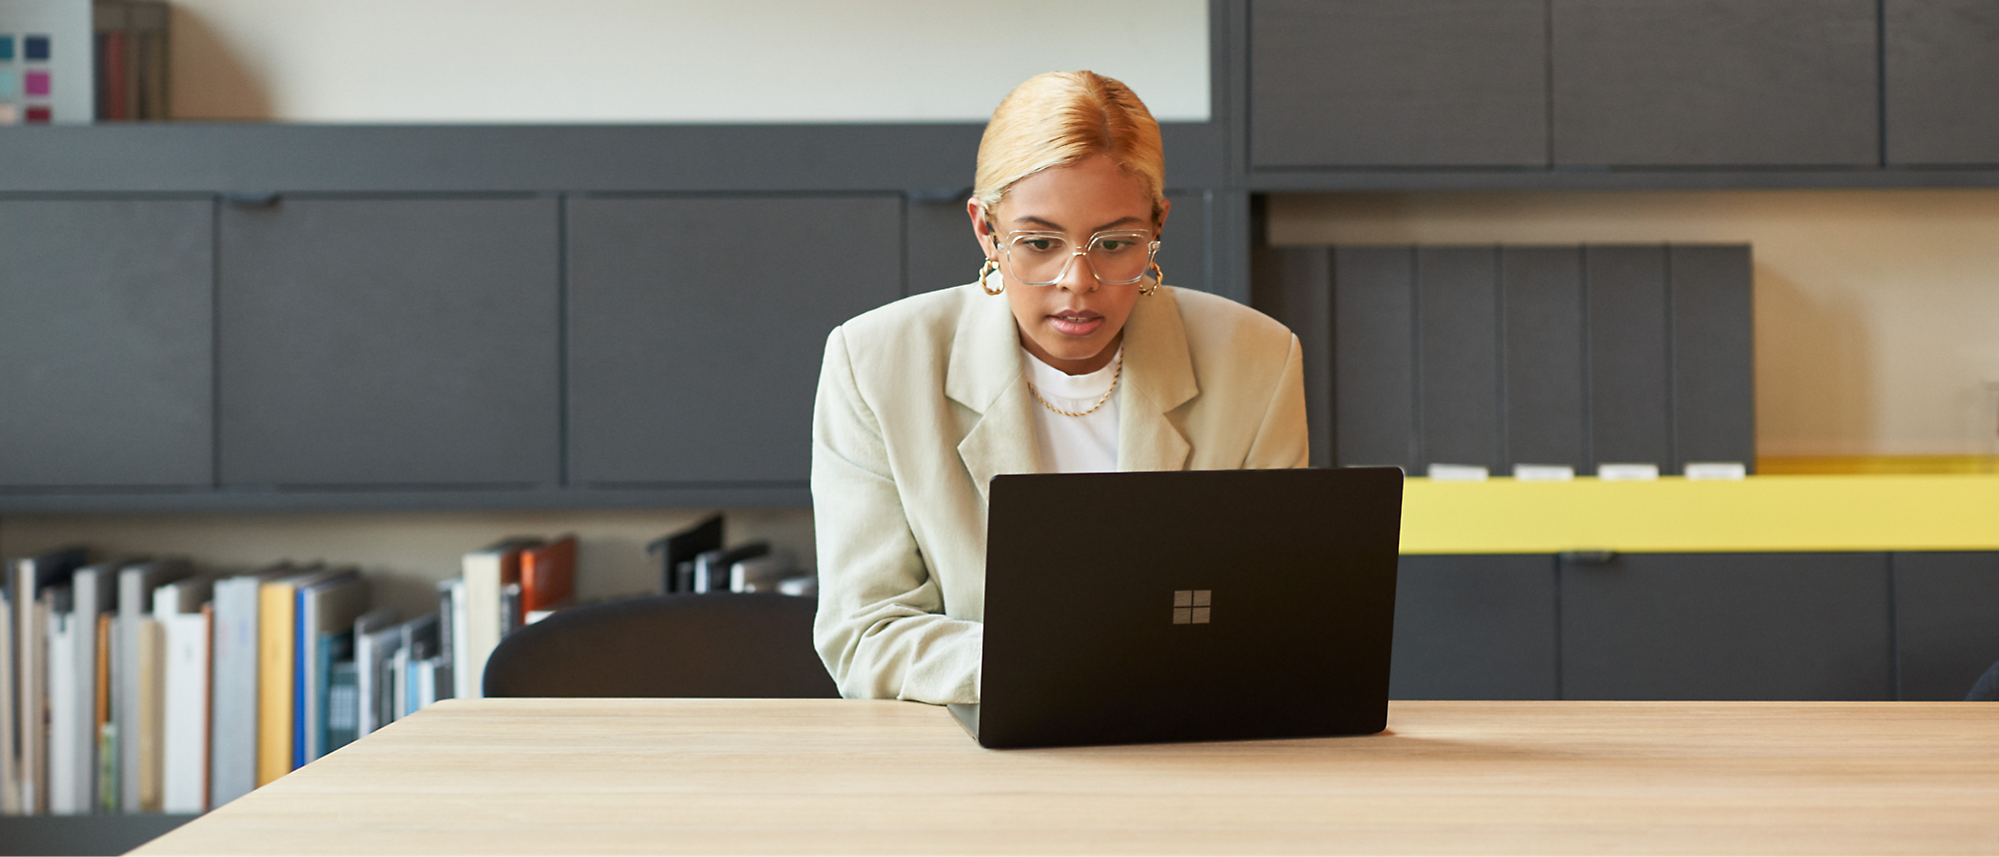 A person with short blonde hair and glasses sits at a wooden table, focused on a black laptop